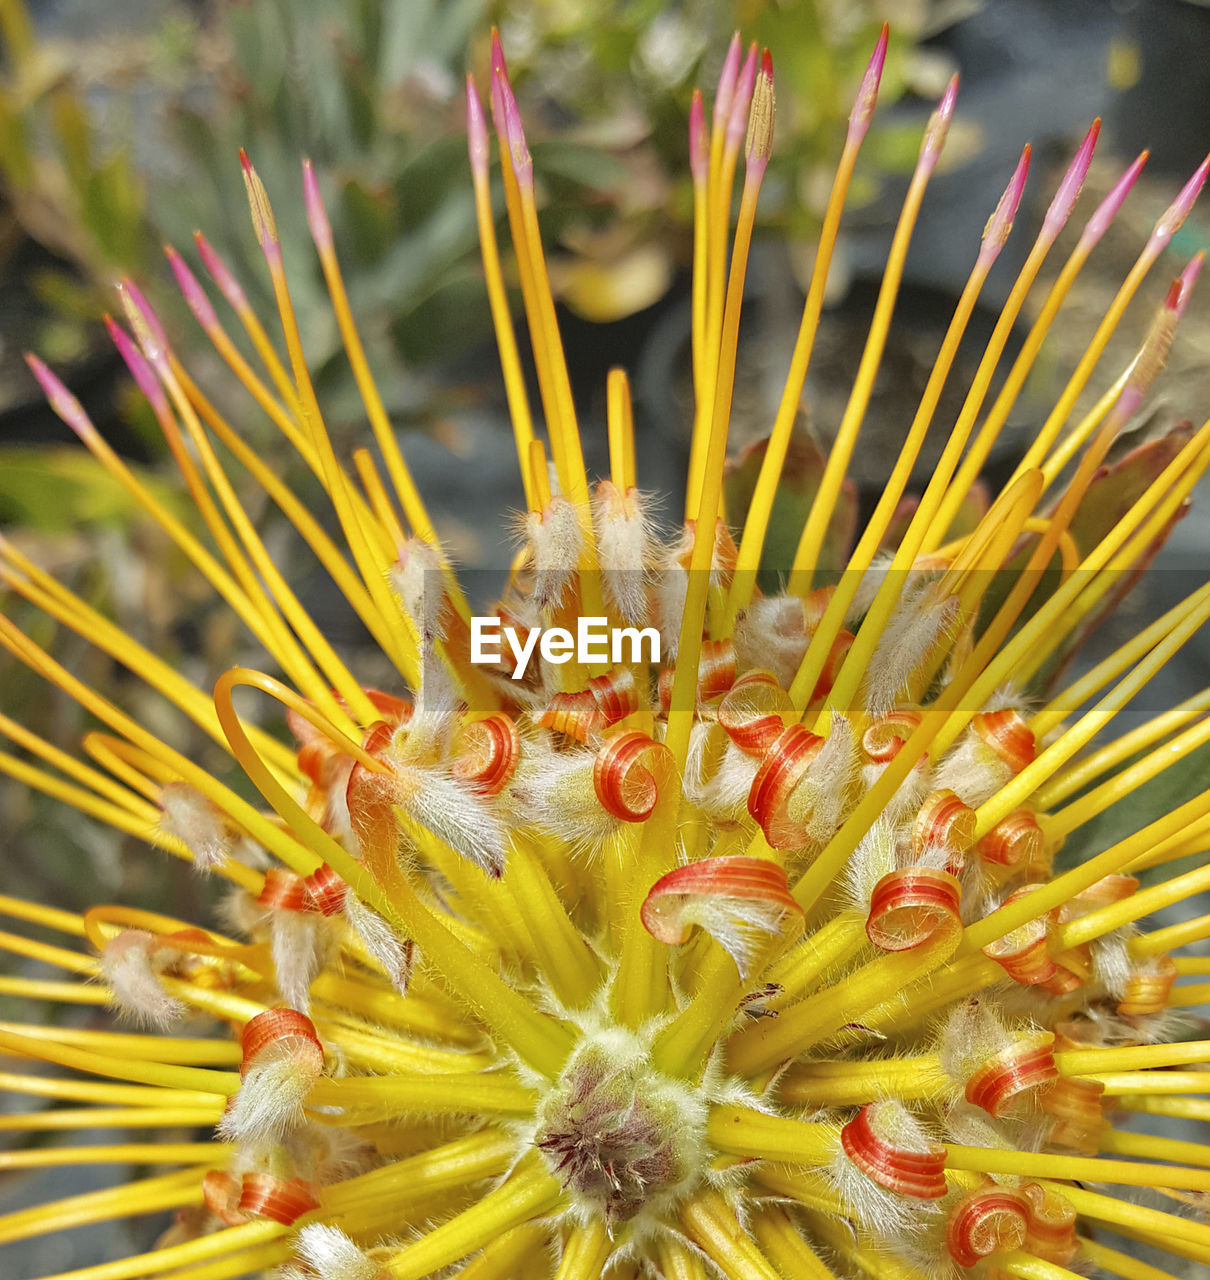 Extreme close up of flower